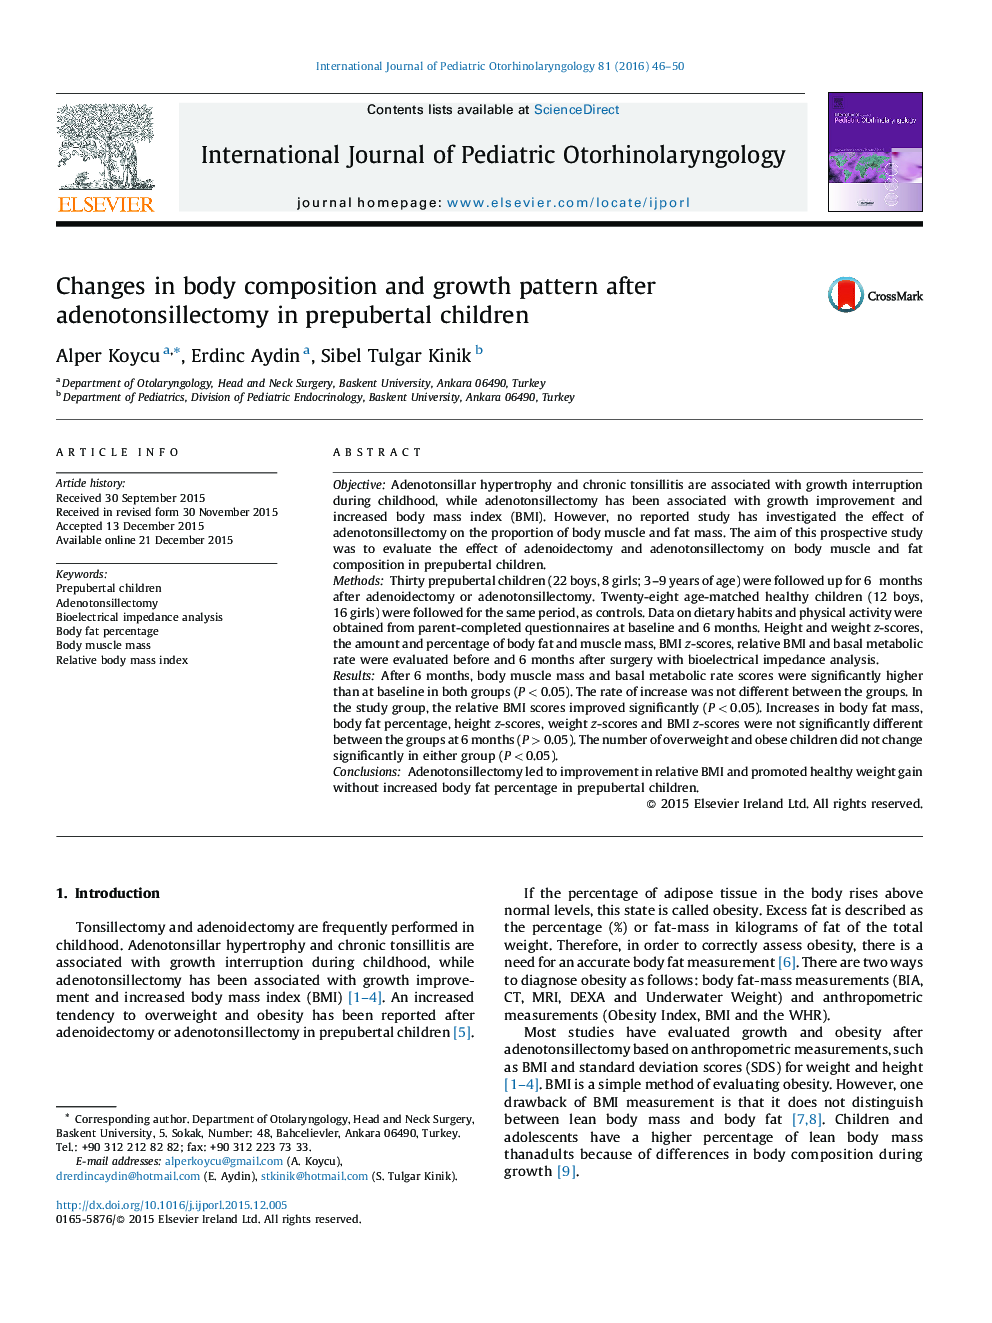 Changes in body composition and growth pattern after adenotonsillectomy in prepubertal children